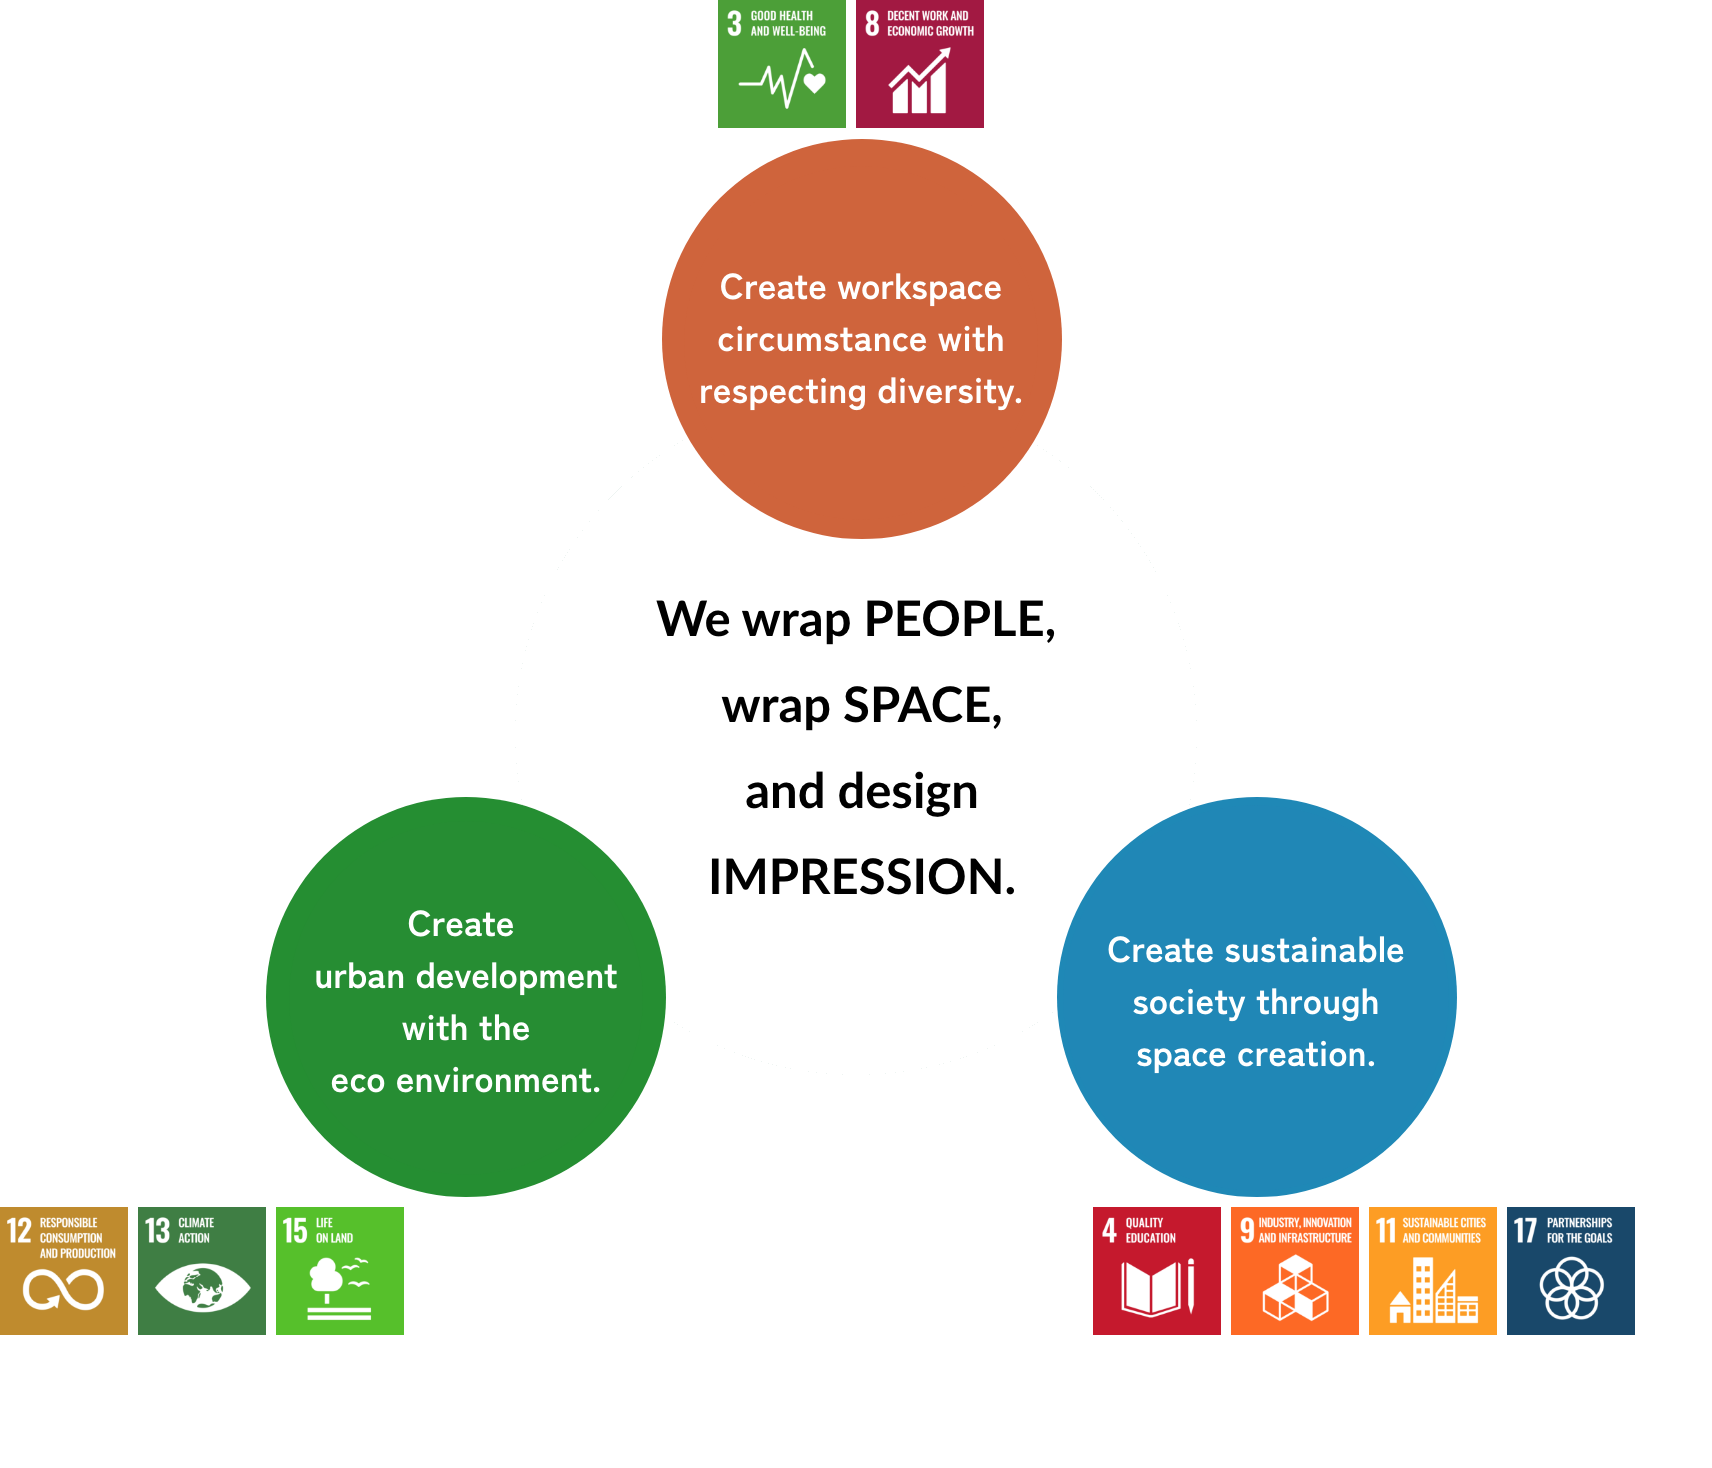 Enveloping people's lives and culture. Creating a work environment that respects diversity Creating an environmentally friendly community Creating a sustainable society through spatial creation